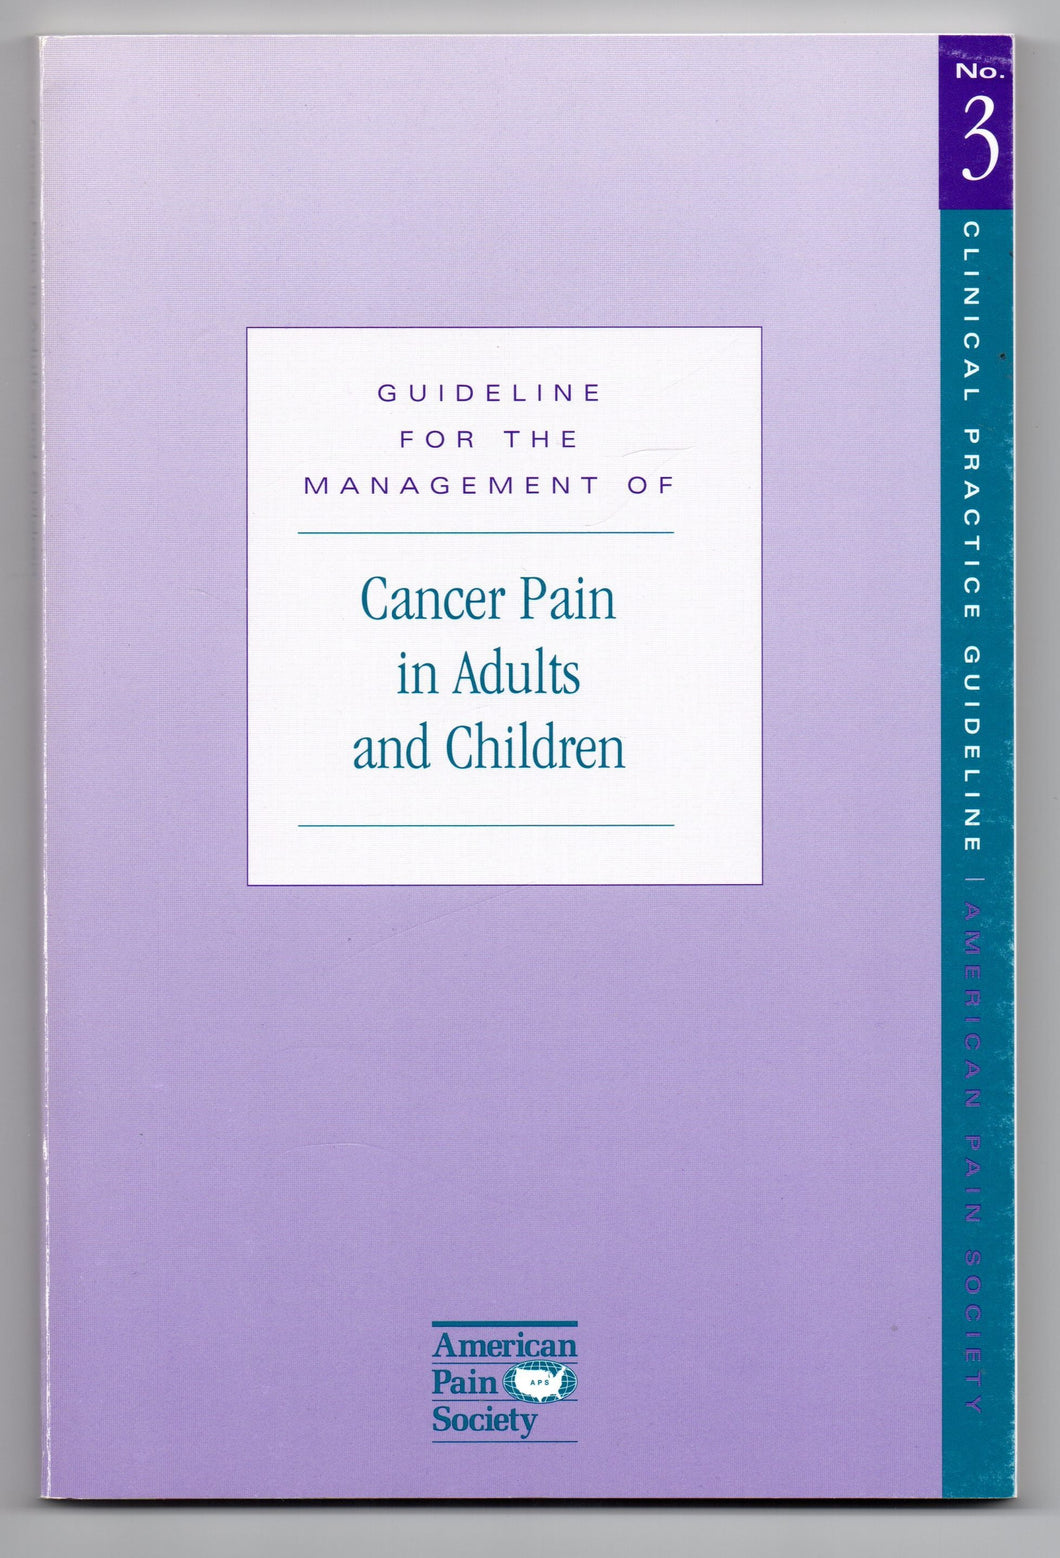 Guideline for the Management of Cancer Pain in Adults and Children